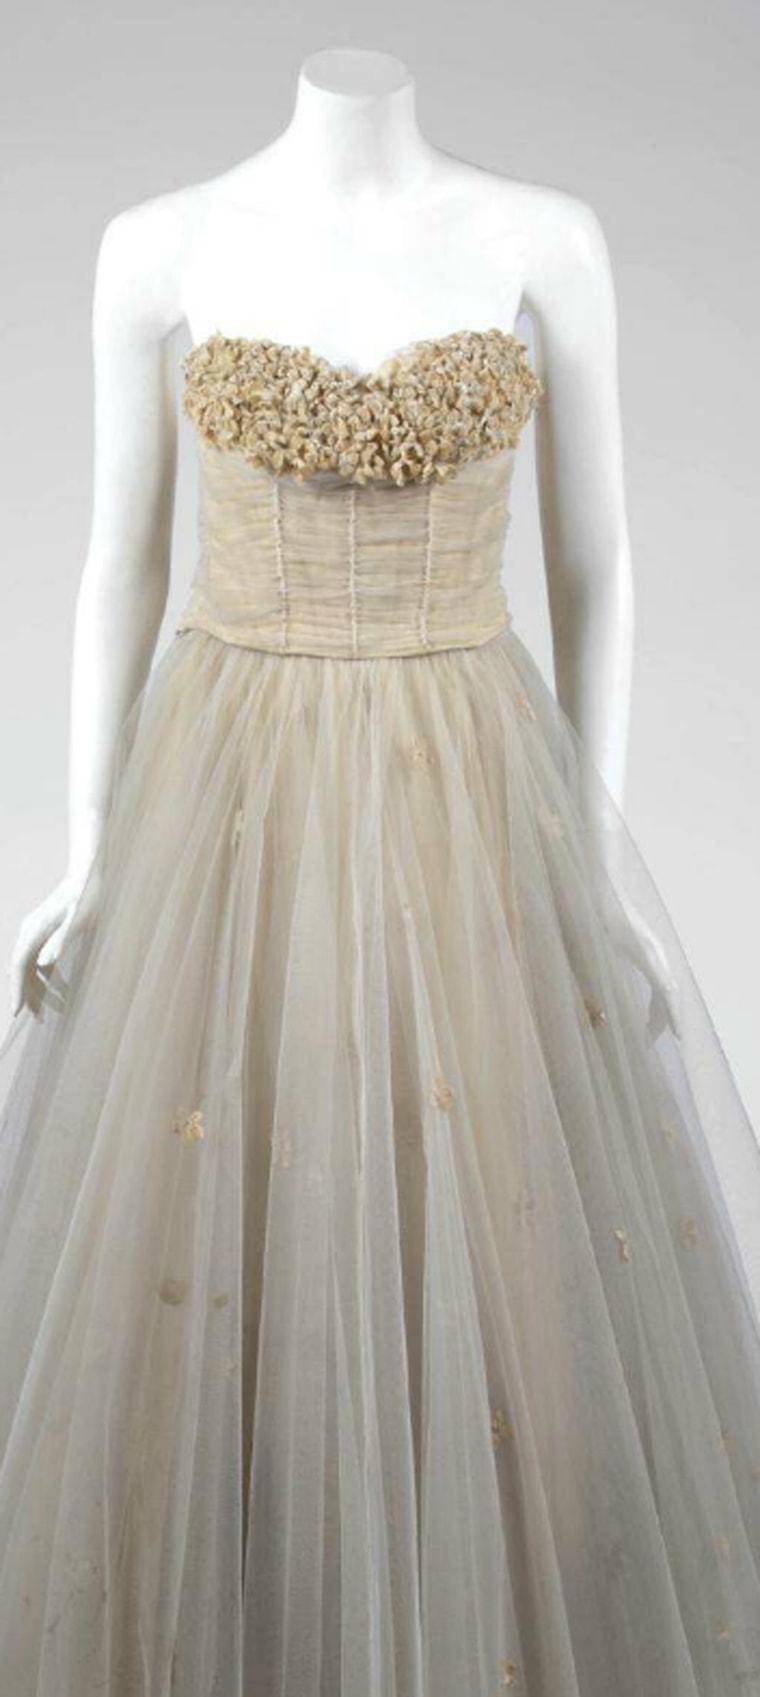 This gown, worn by Elizabeth Taylor in the 1951 film